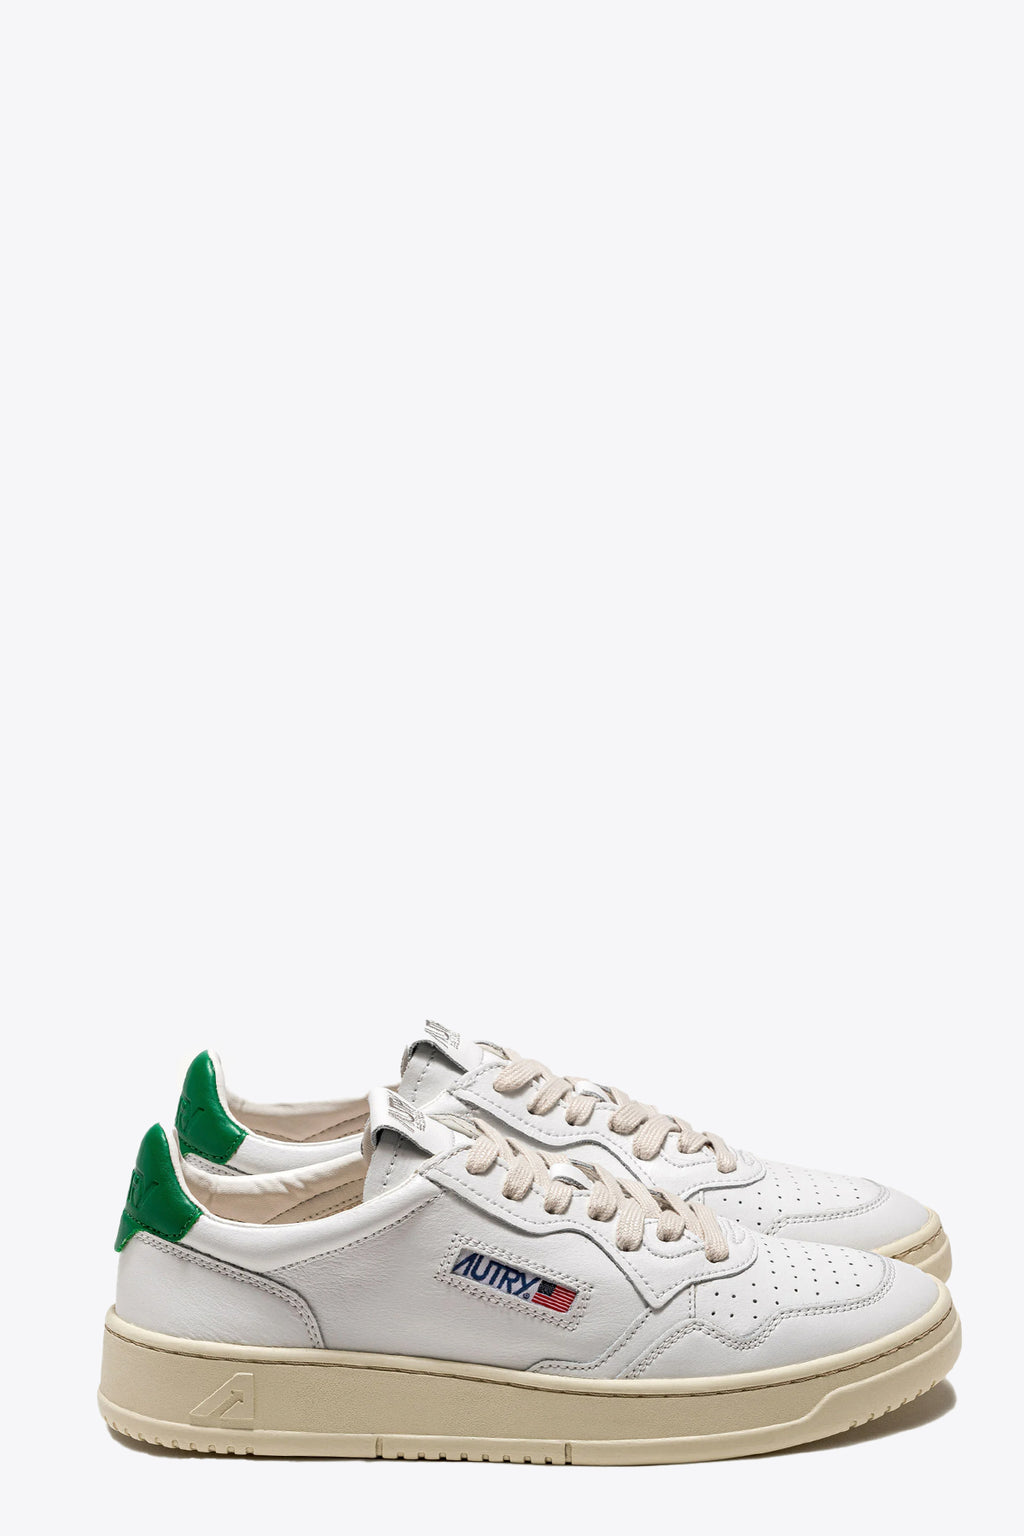 alt-image__White-leather-low-sneaker-with-green-tab---Medalist